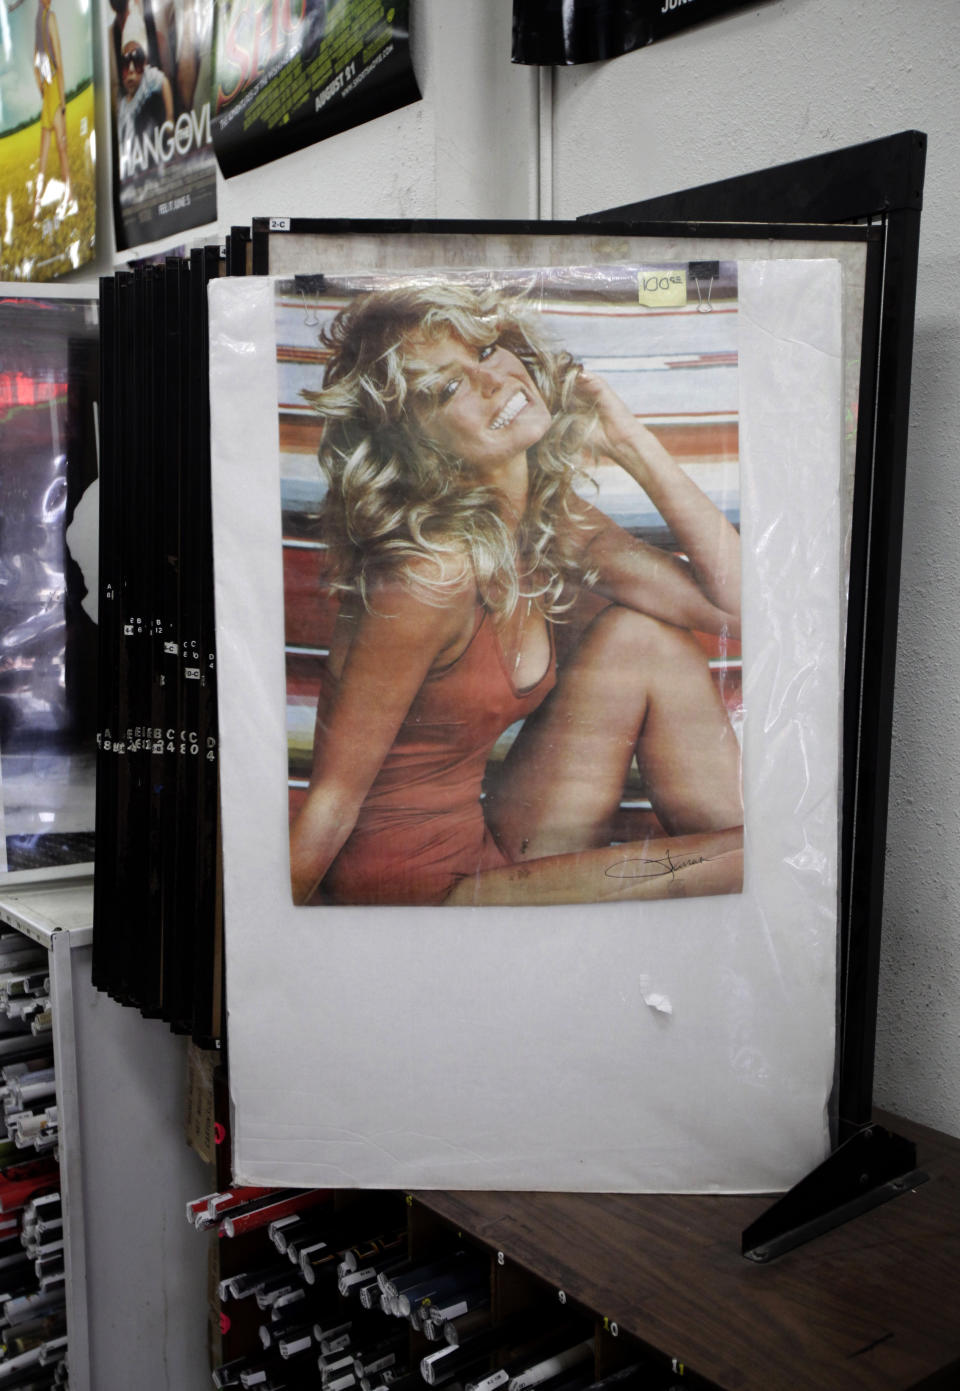 A poster of actress Farrah Fawcett is for sale at Hollywood Book in 2009. (Photo: AP/Jae C. Hong)